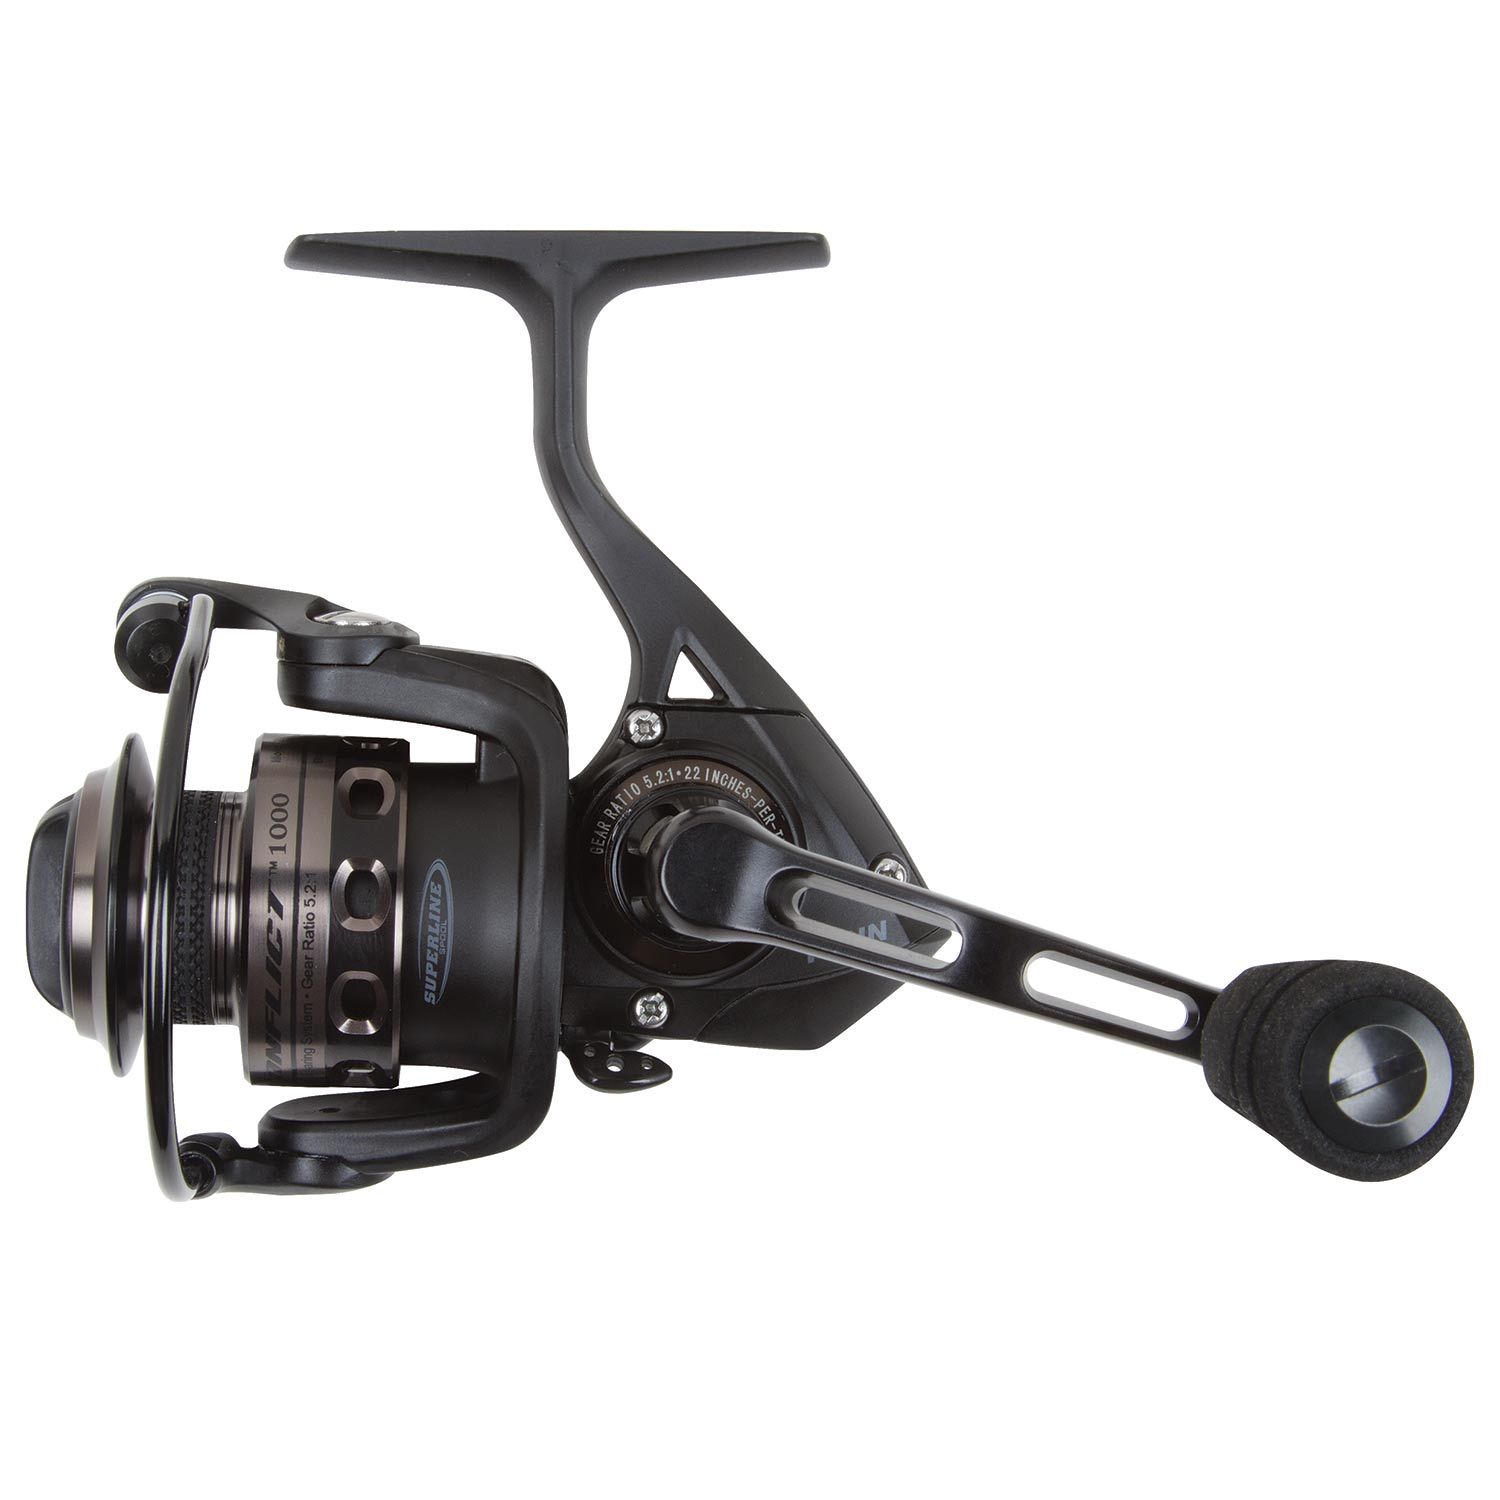 Penn Conflict 8000 review - The Fishing Website